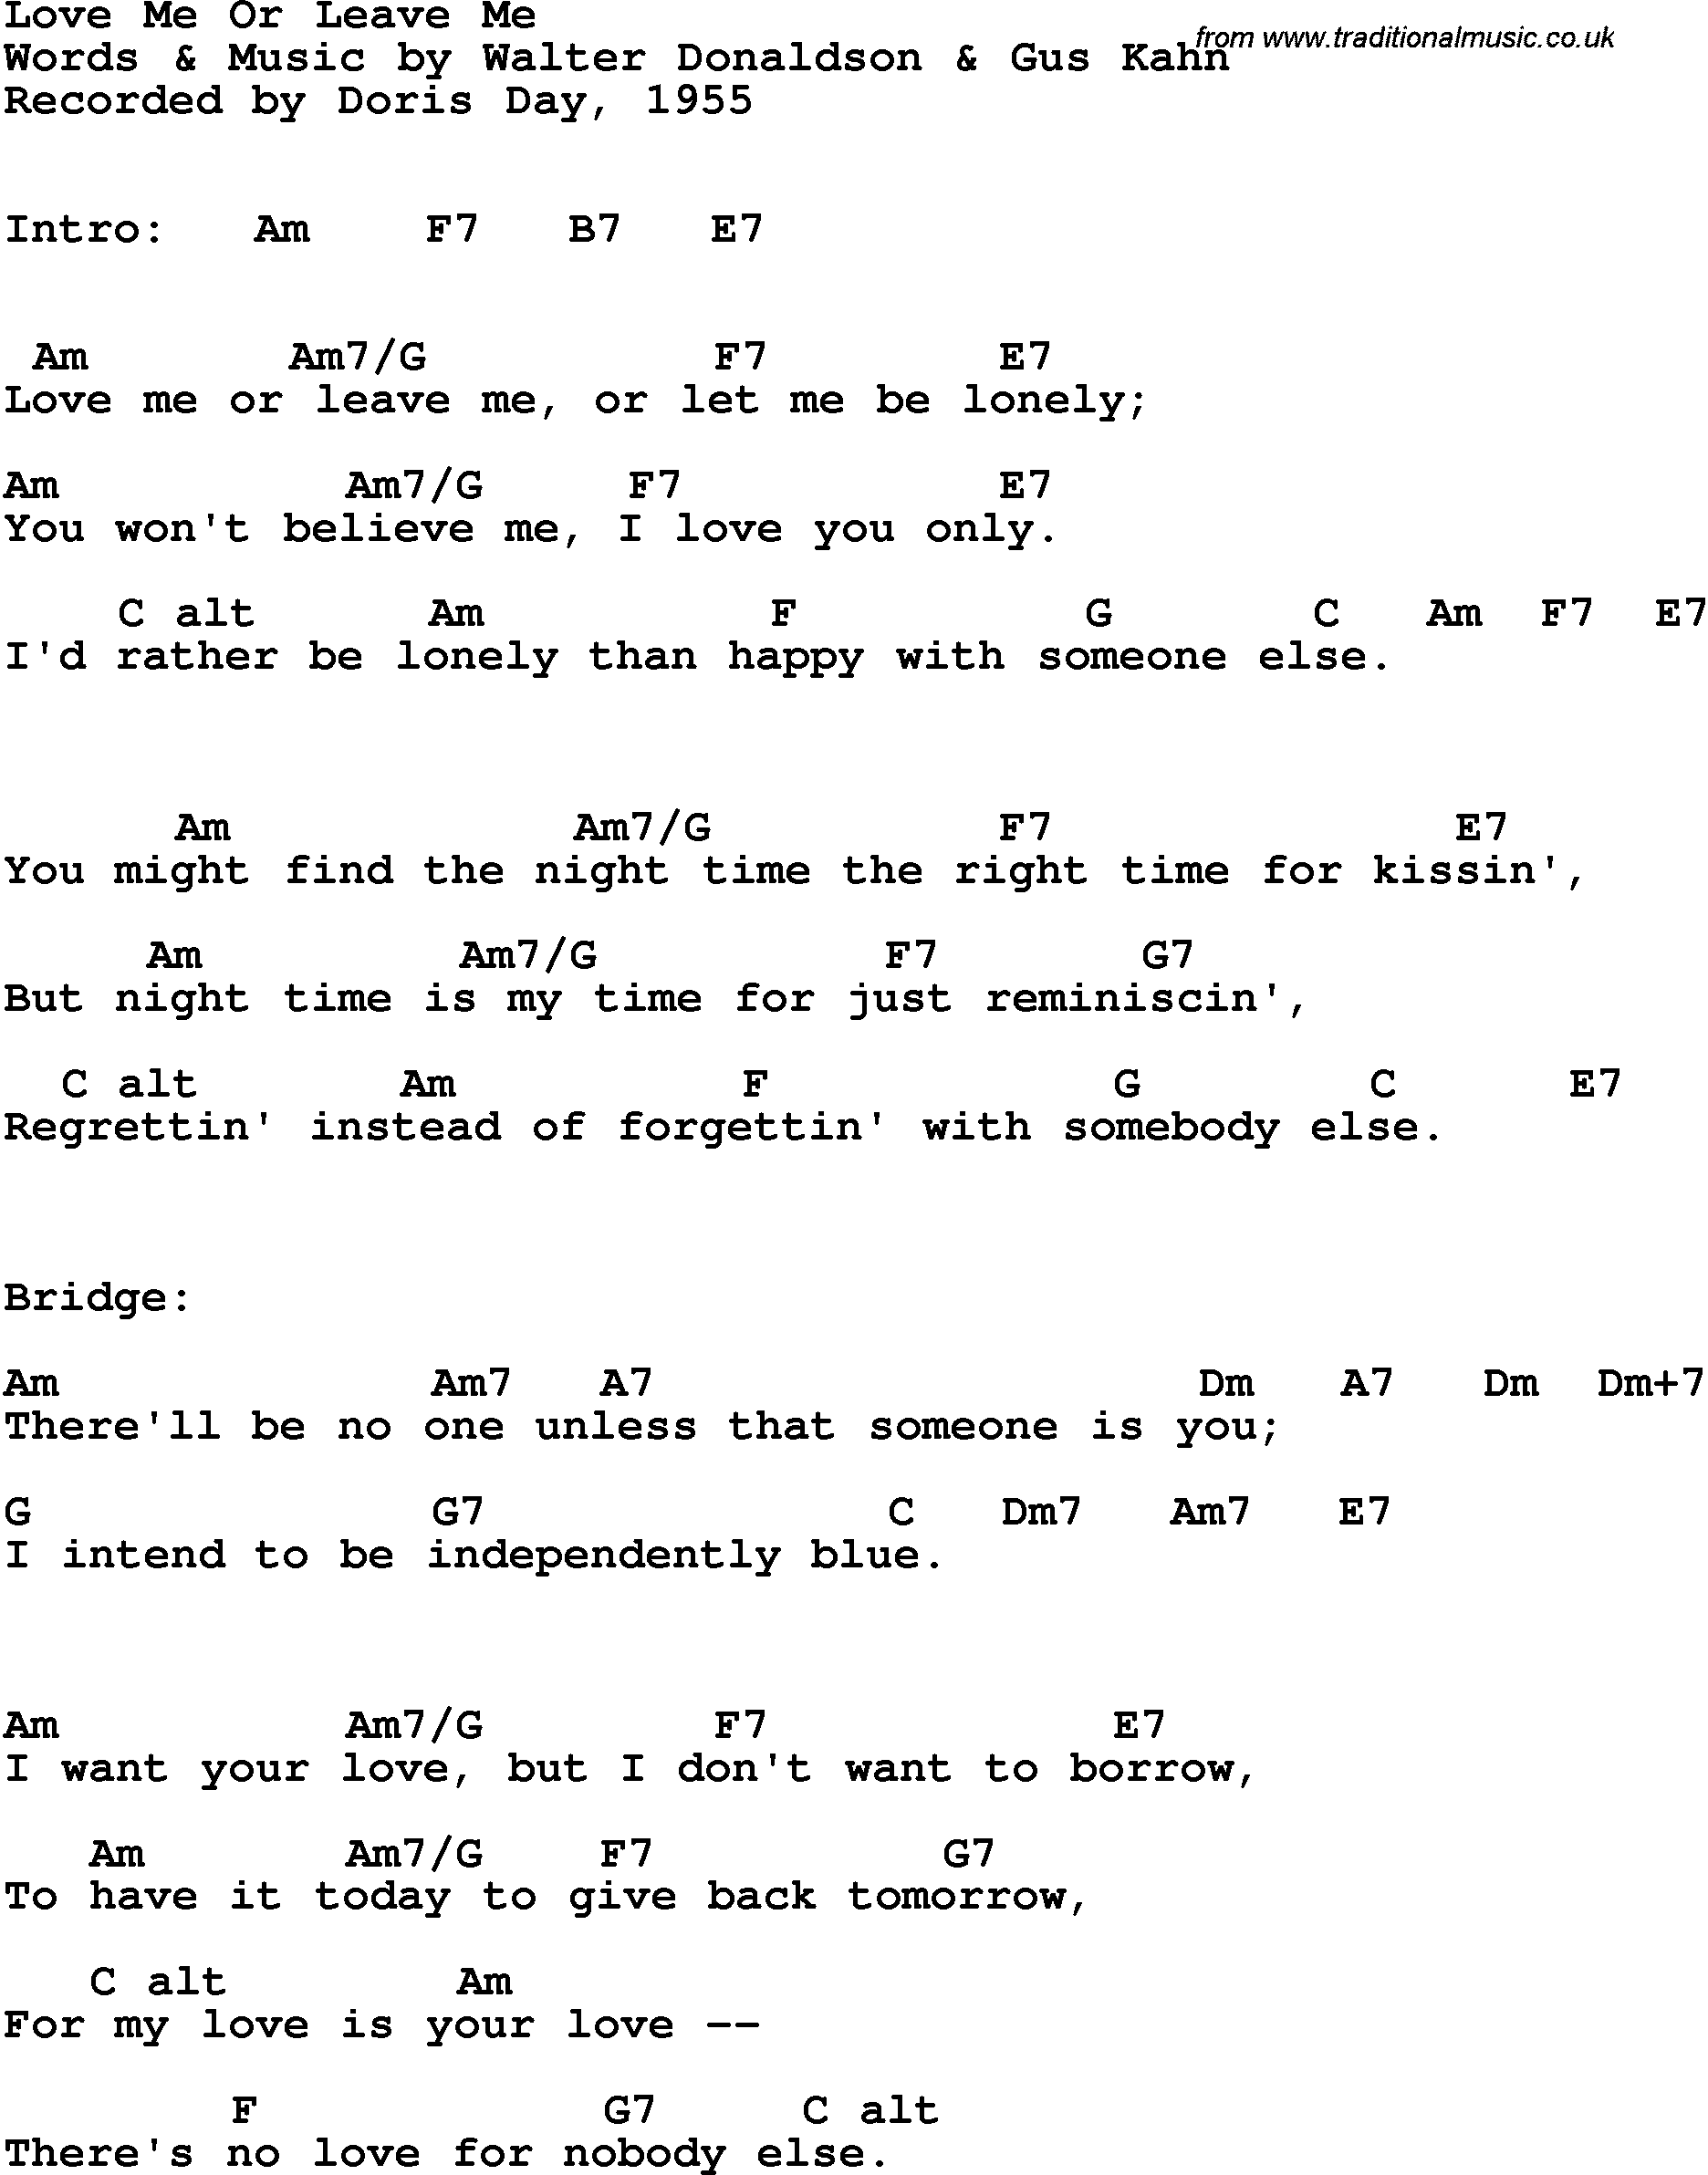 Song Lyrics with guitar chords for Love Me Or Leave Me - Doris Day, 1955